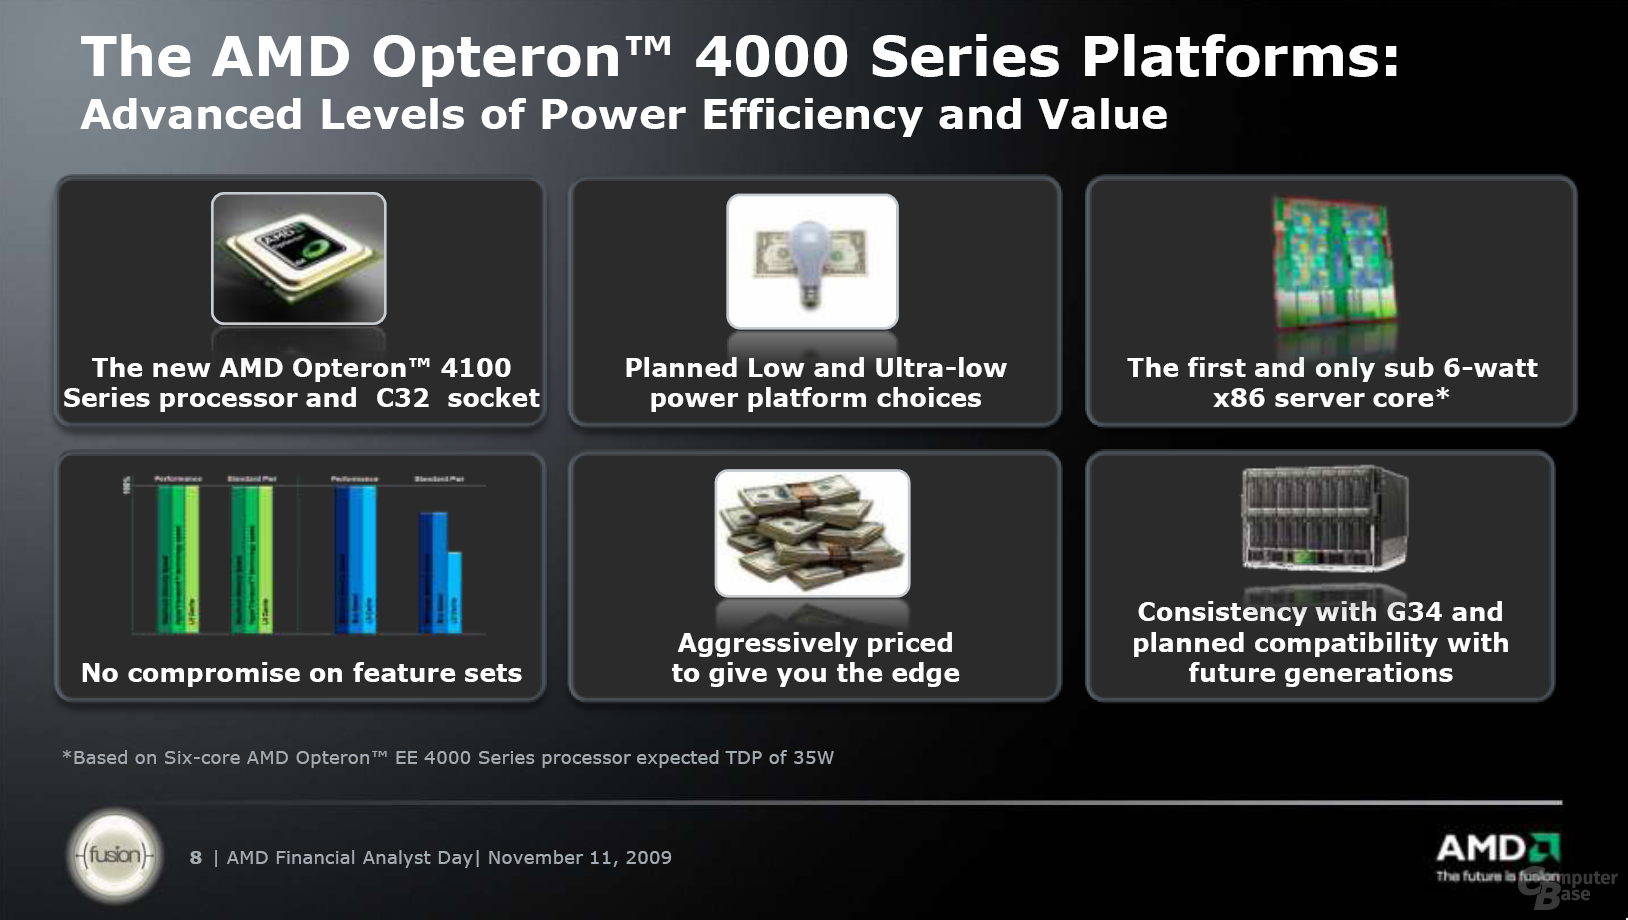 Features der AMD Opteron 4100 Series